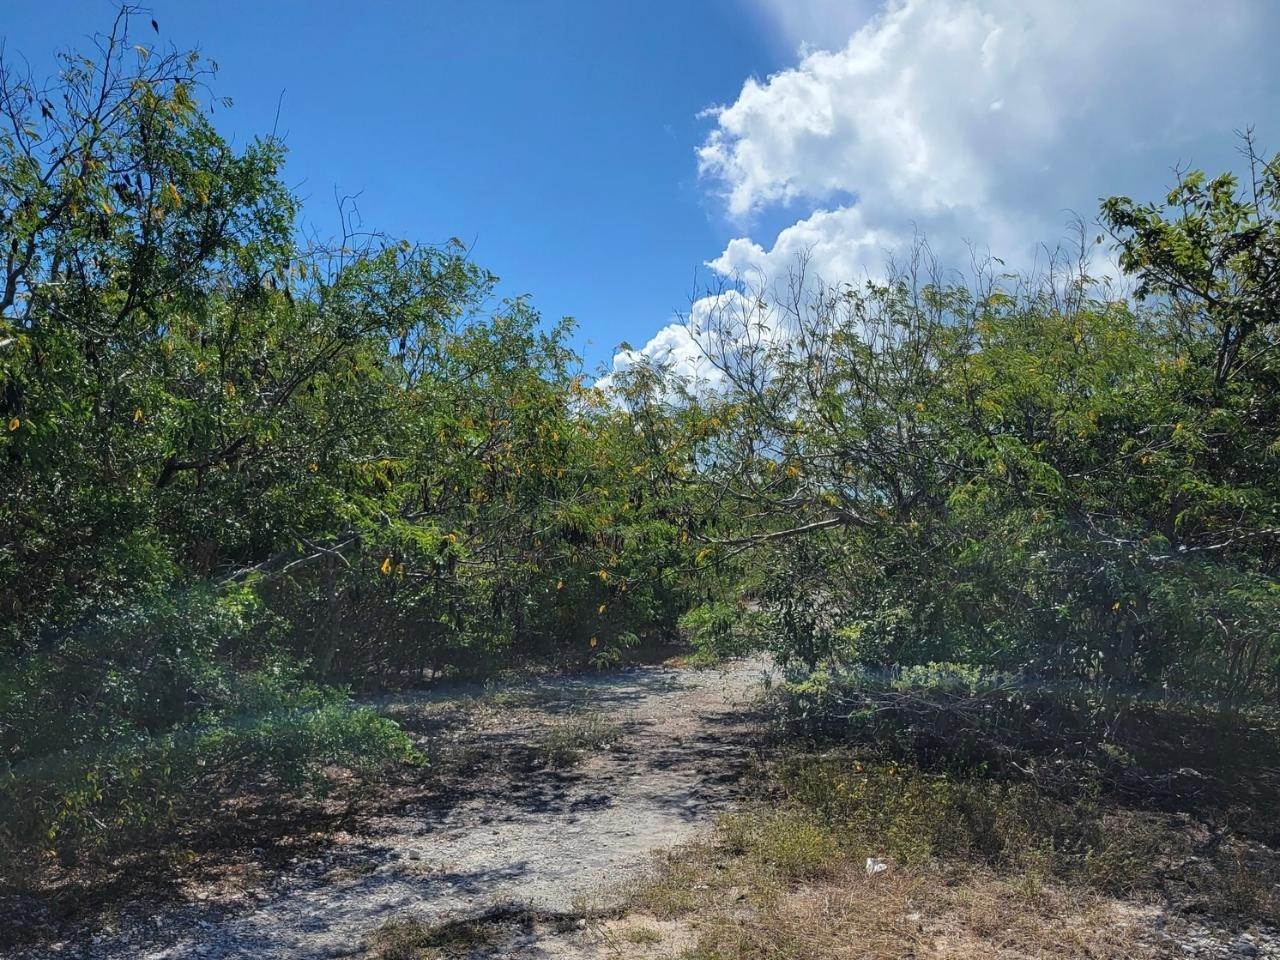 2. Lots / Acreage for Sale at Other Bahamas, Other Areas In The Bahamas, Bahamas